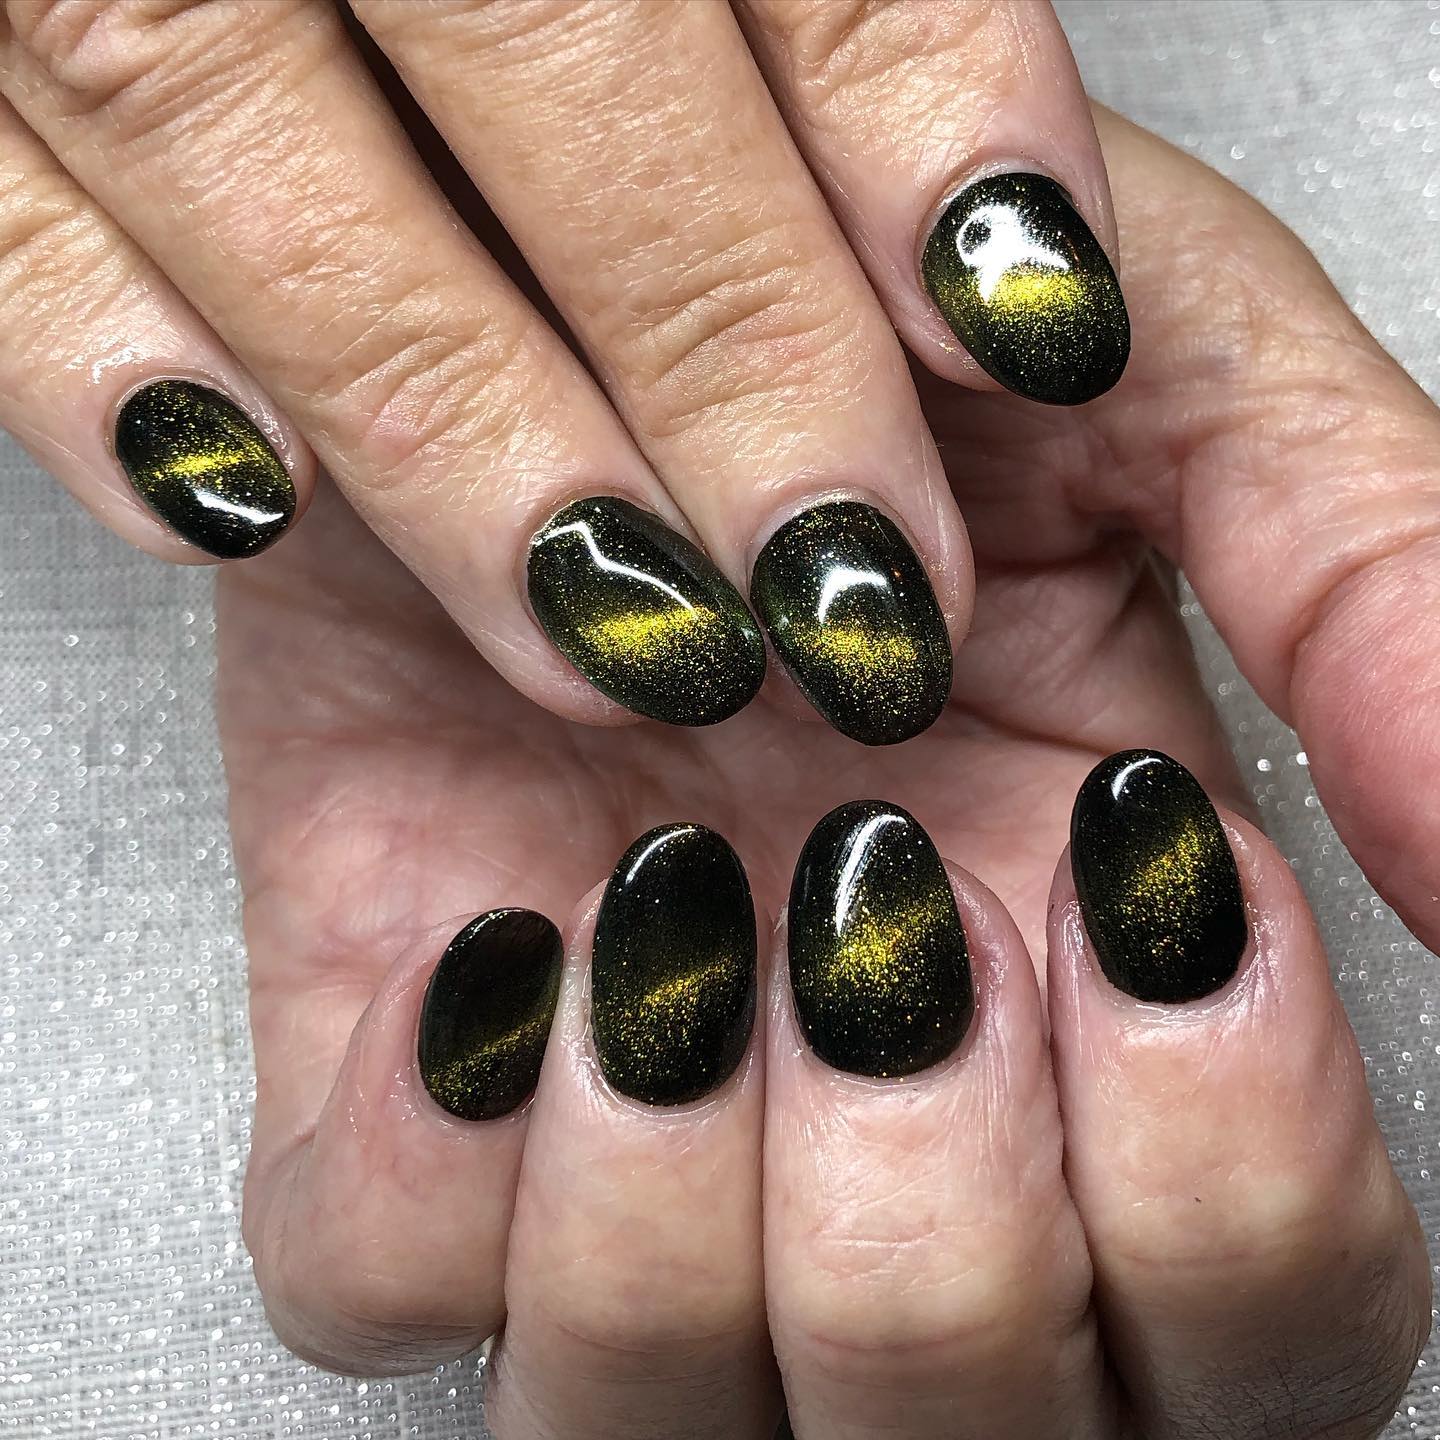 Did you know that black and yellow combination is one of the most attention-grabbing colors? Then, let's combinate them in your cat eye nails.